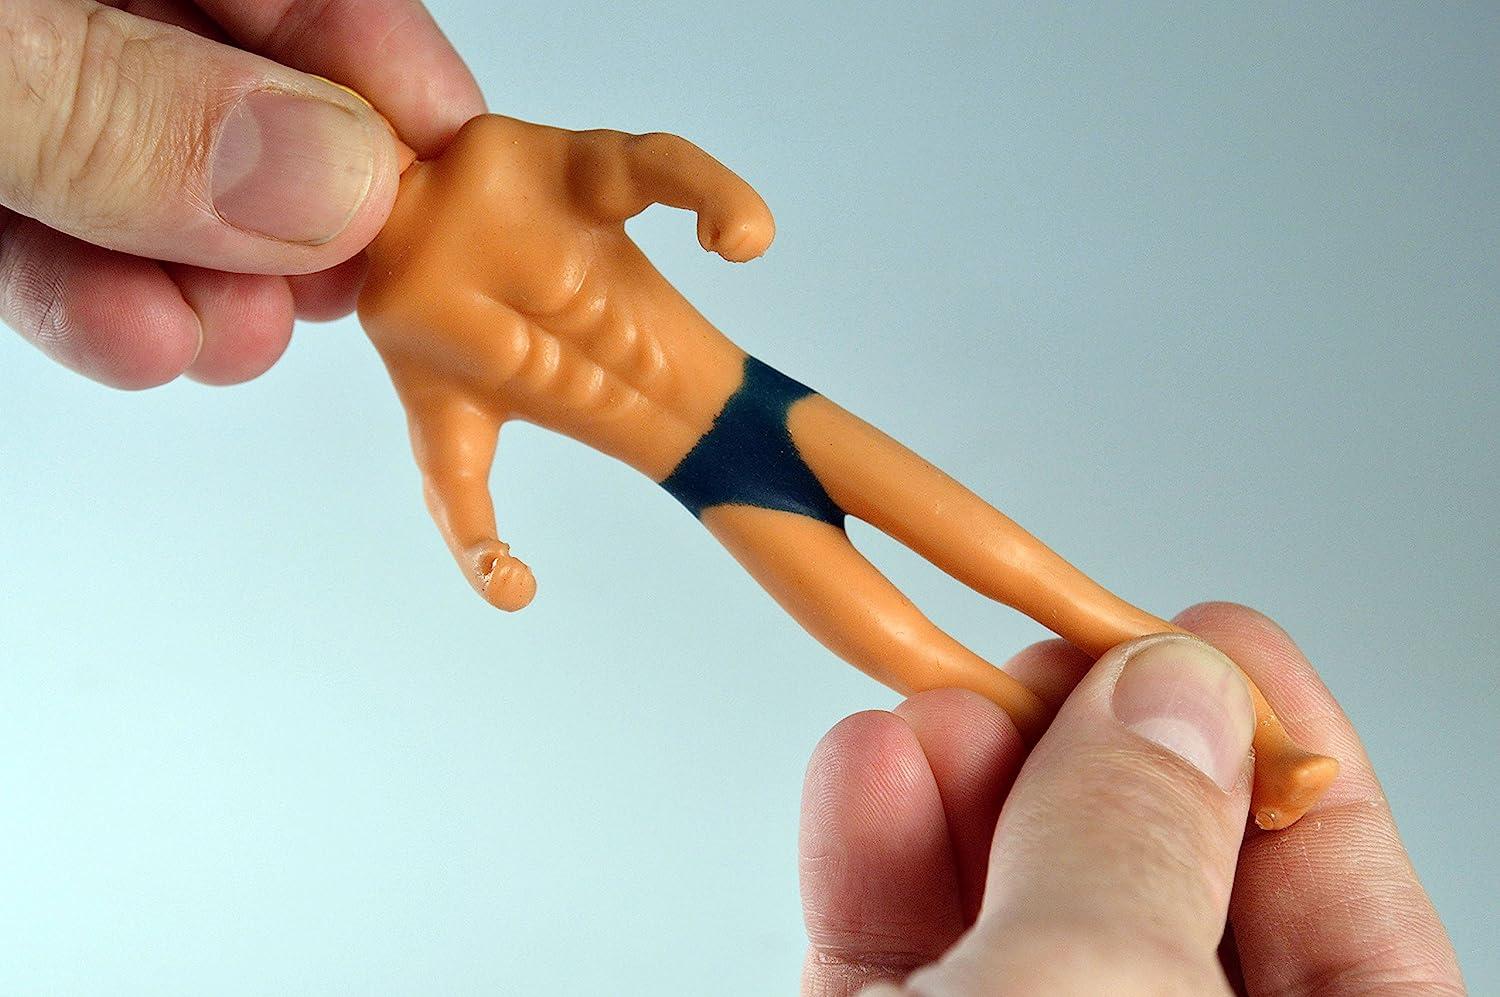 Worlds Smallest Rubber STRETCH ARMSTRONG